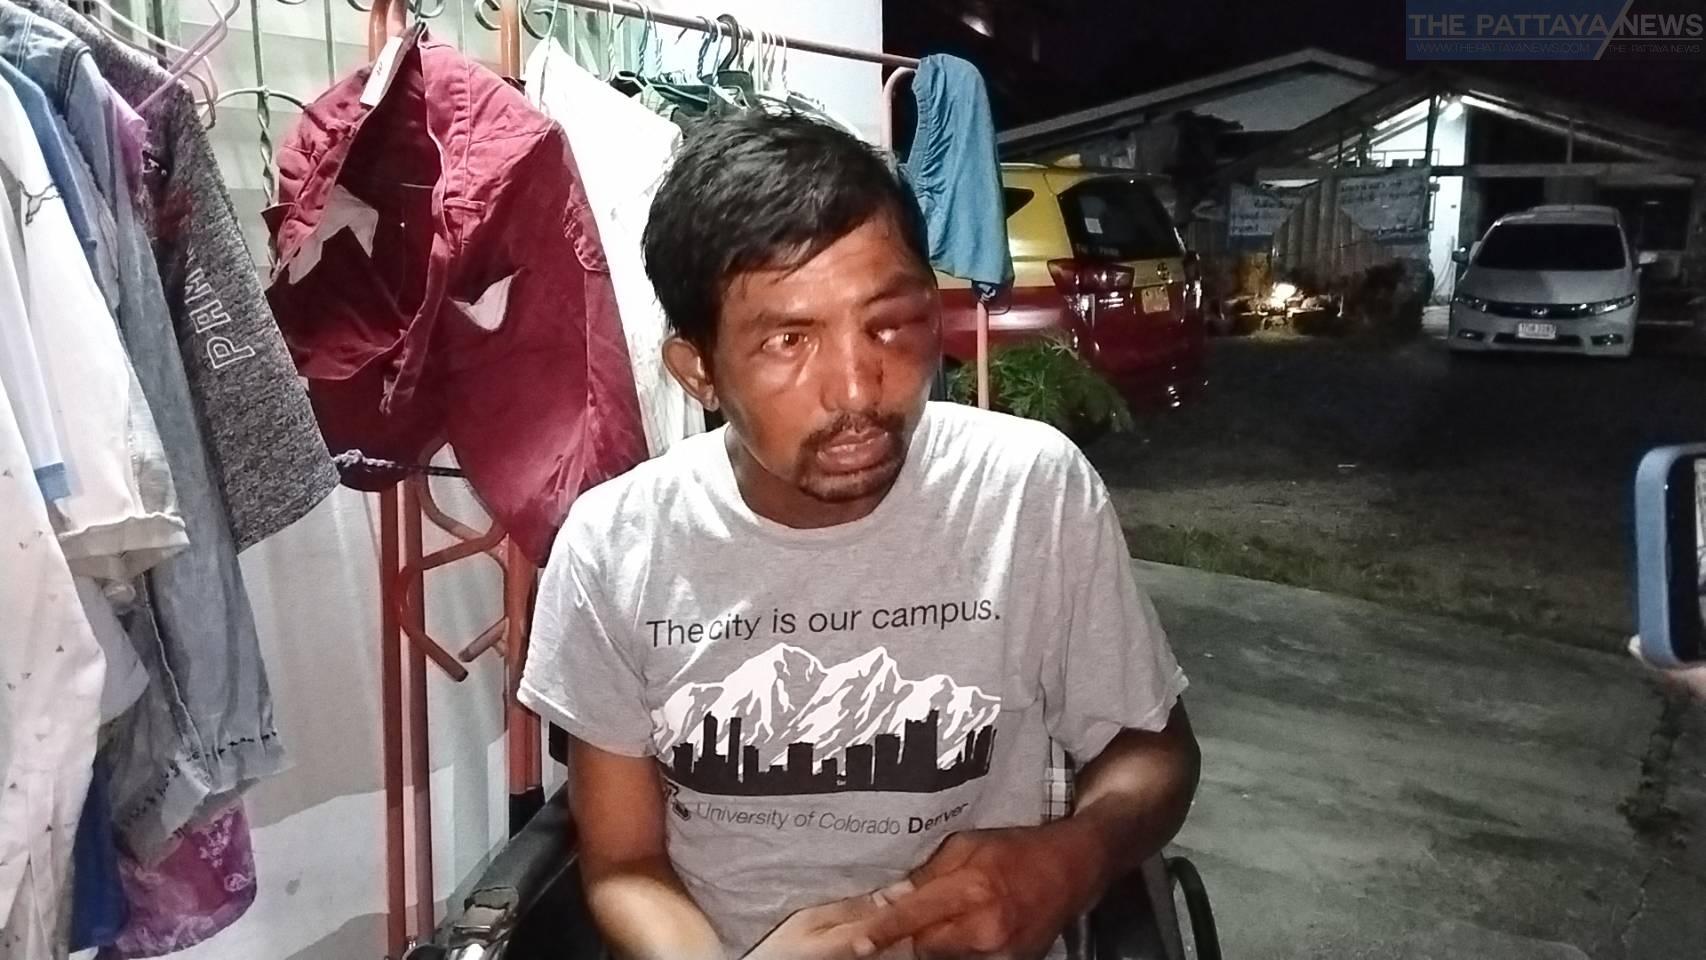 Handicapped lottery seller in a wheelchair brutally assaulted and robbed in Pattaya